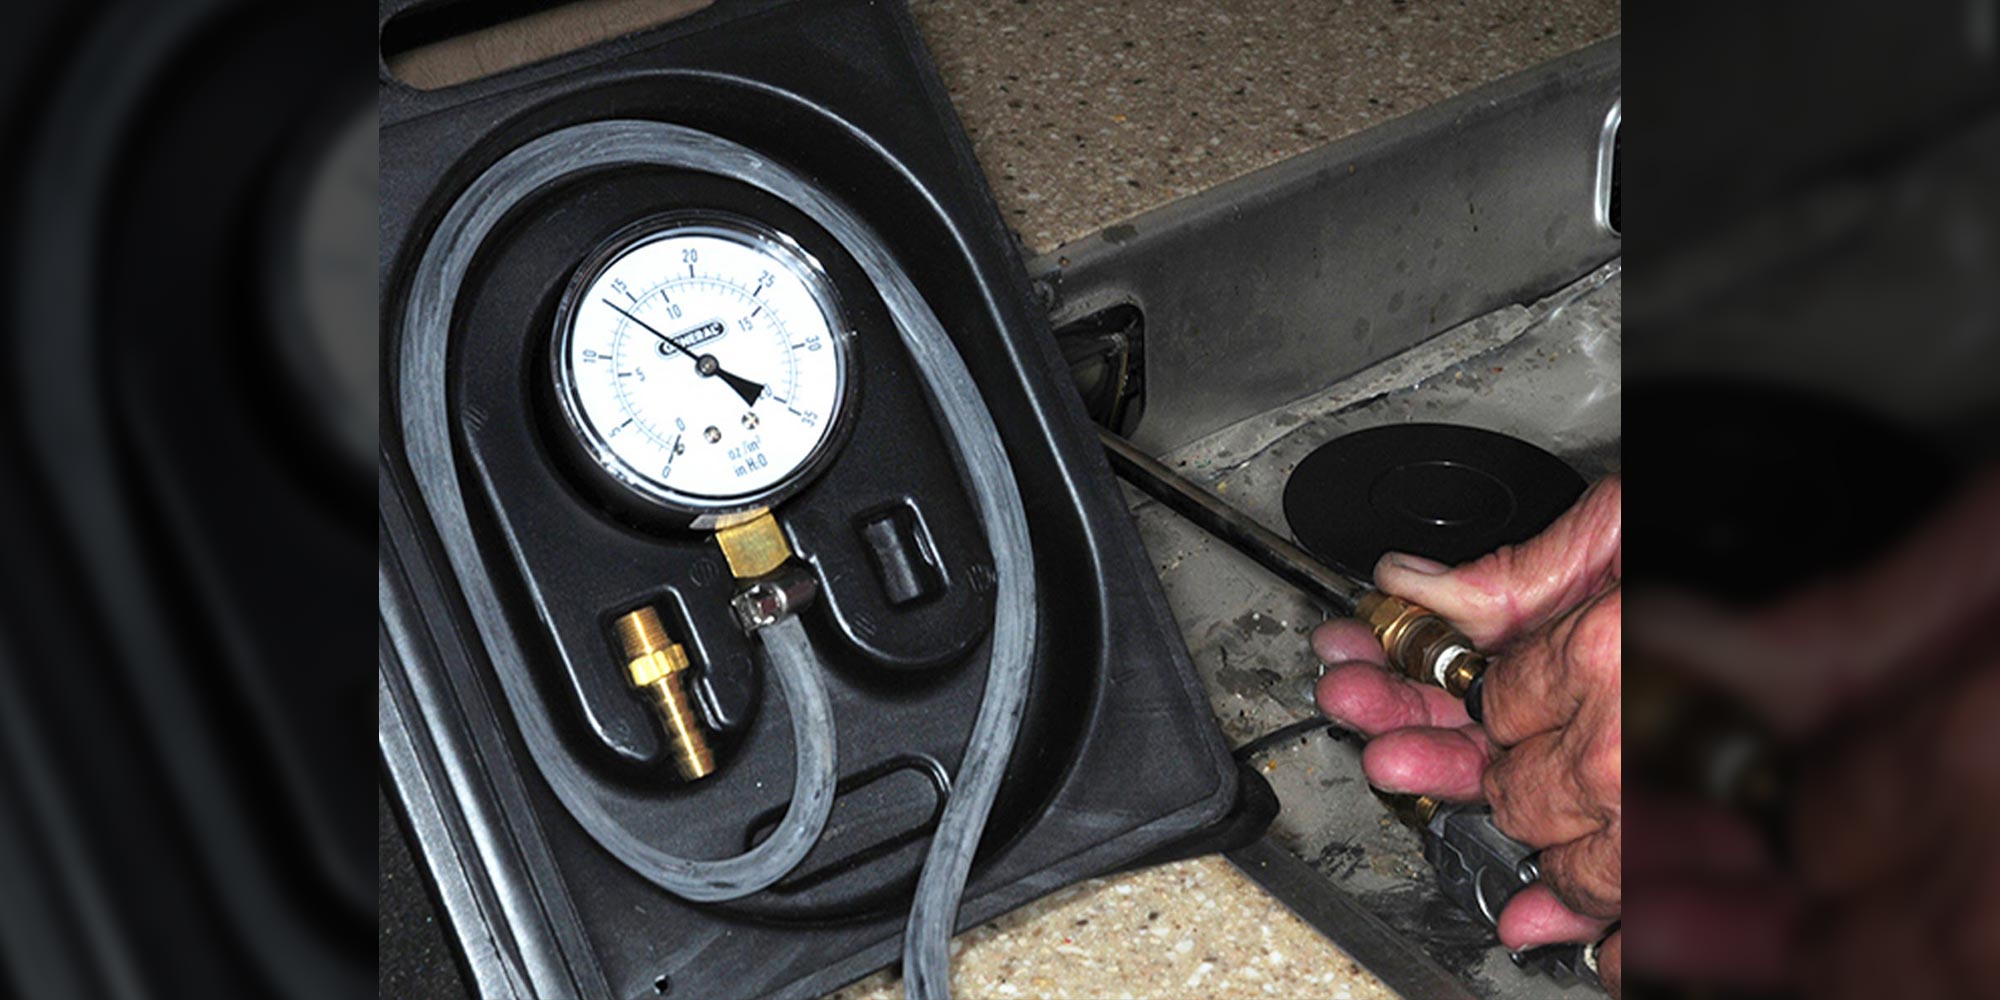 a device being used to measure LP gas pressure in a RV